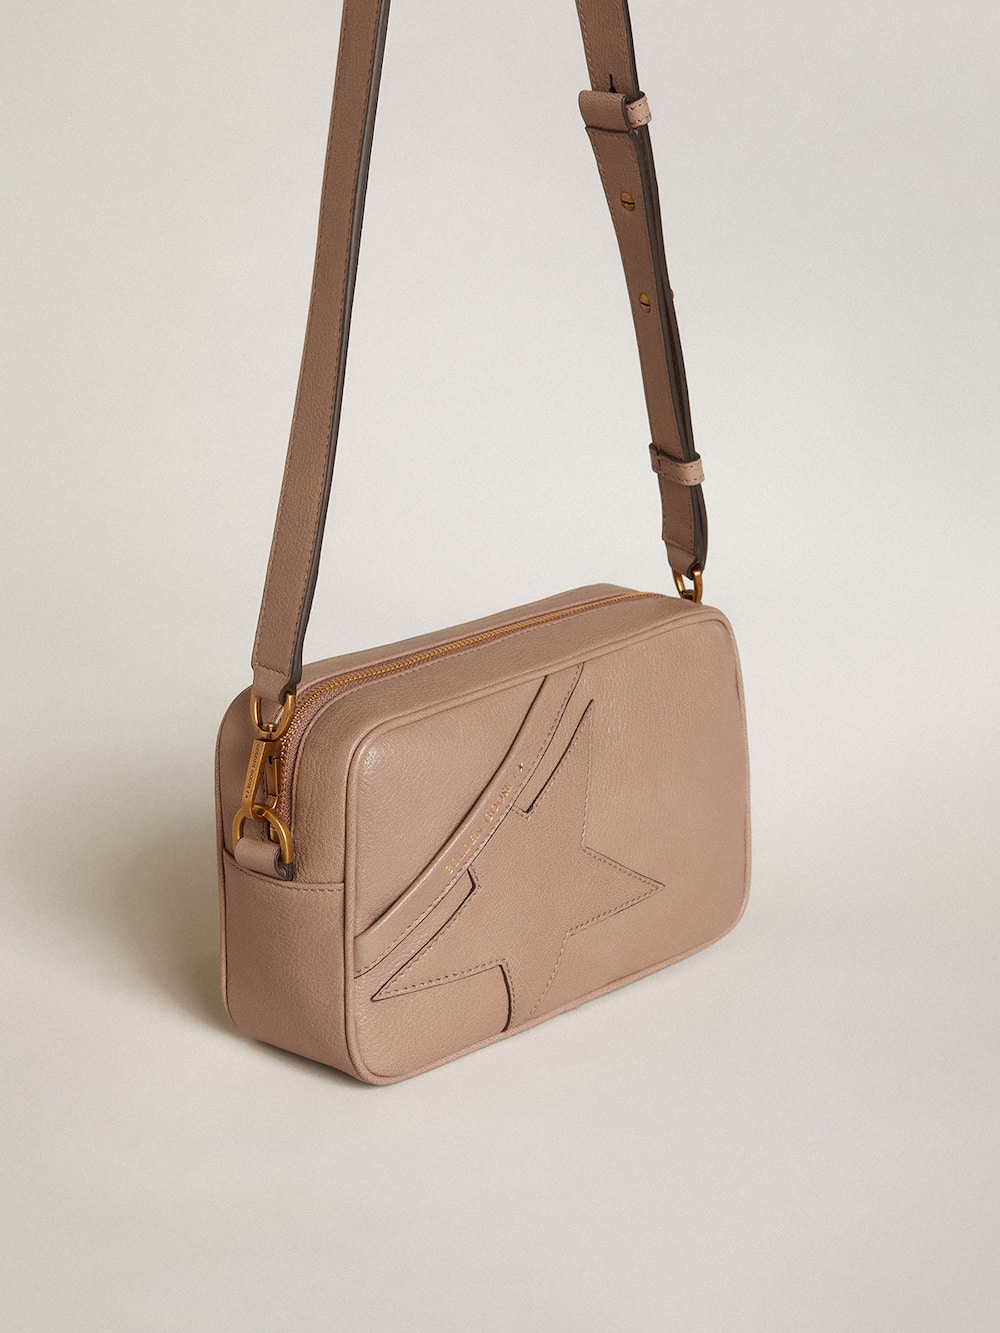 Golden Goose - Women’s Star Bag in ash-colored leather in 